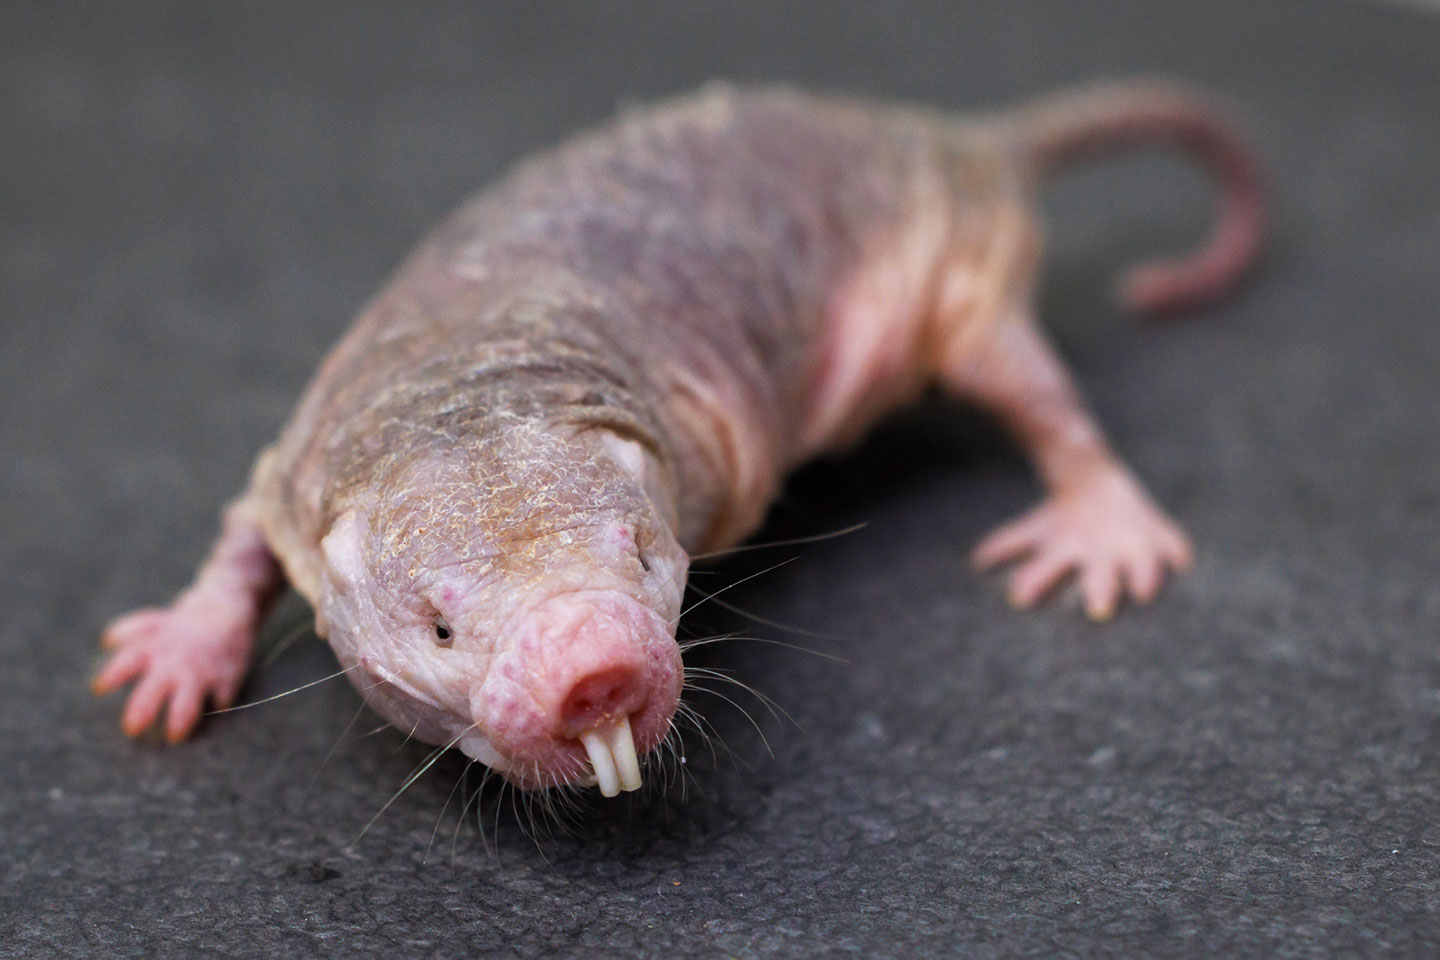 a photo of a naked mole rat, a small wrinkly rodent with no hair and two long top front teeth